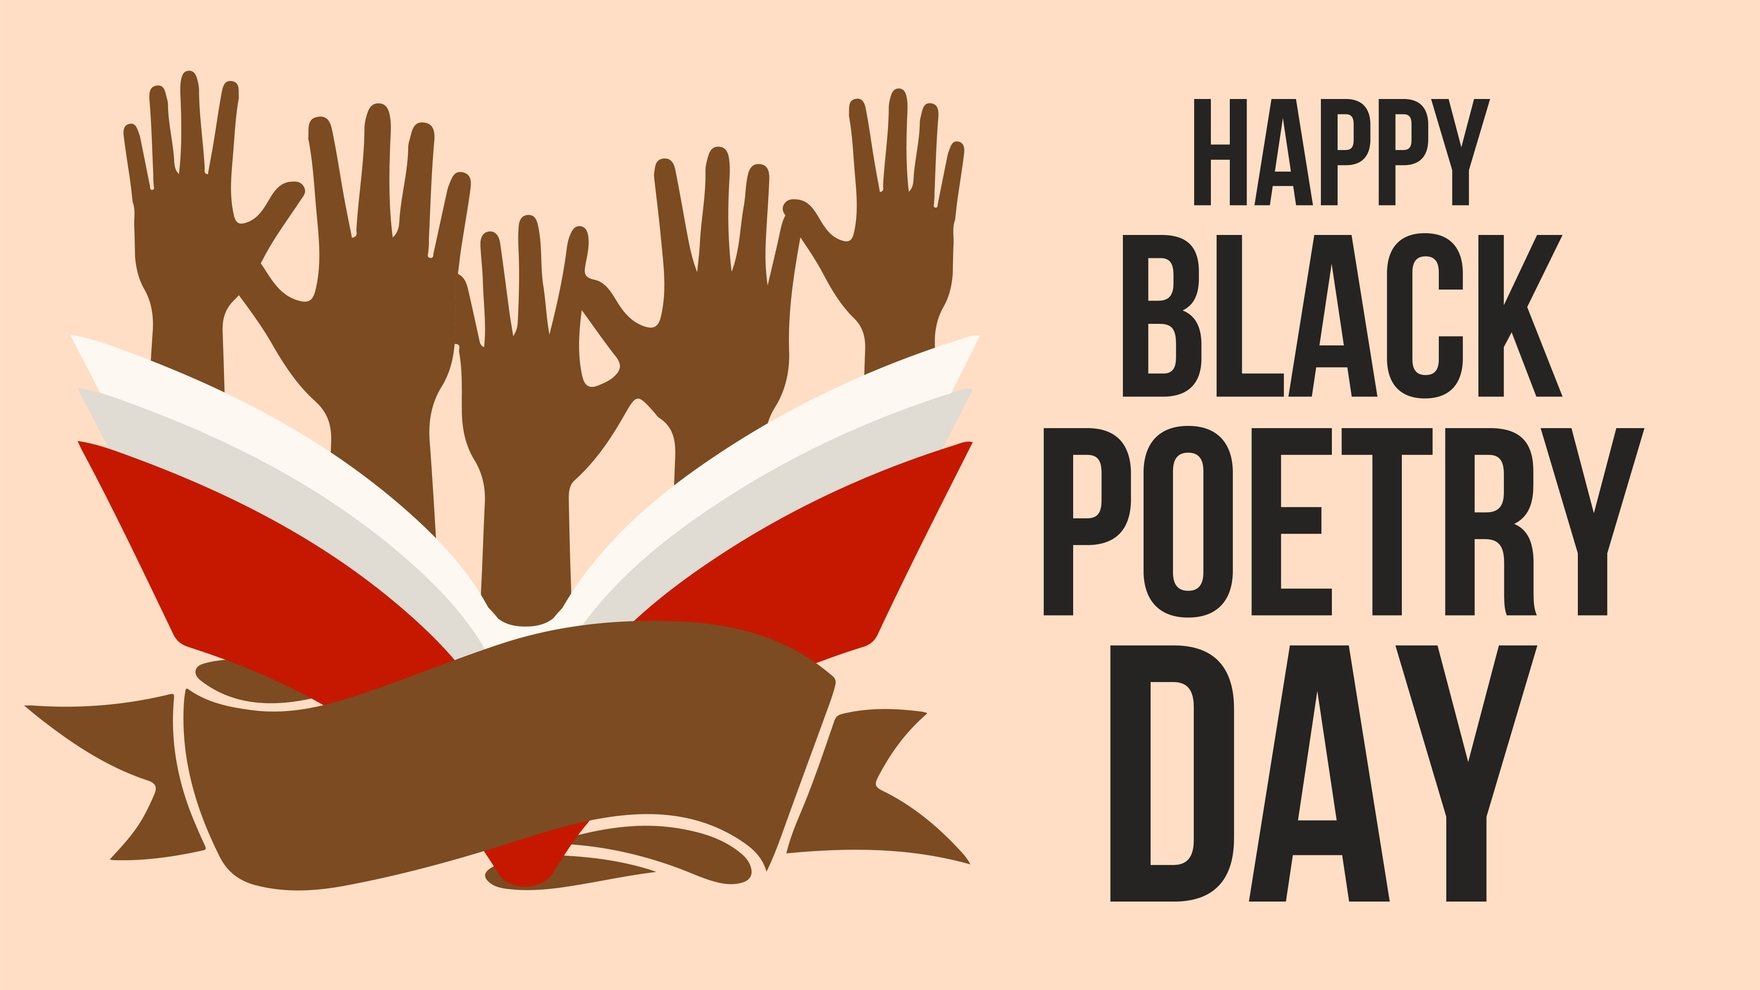 Happy Black Poetry Day Background